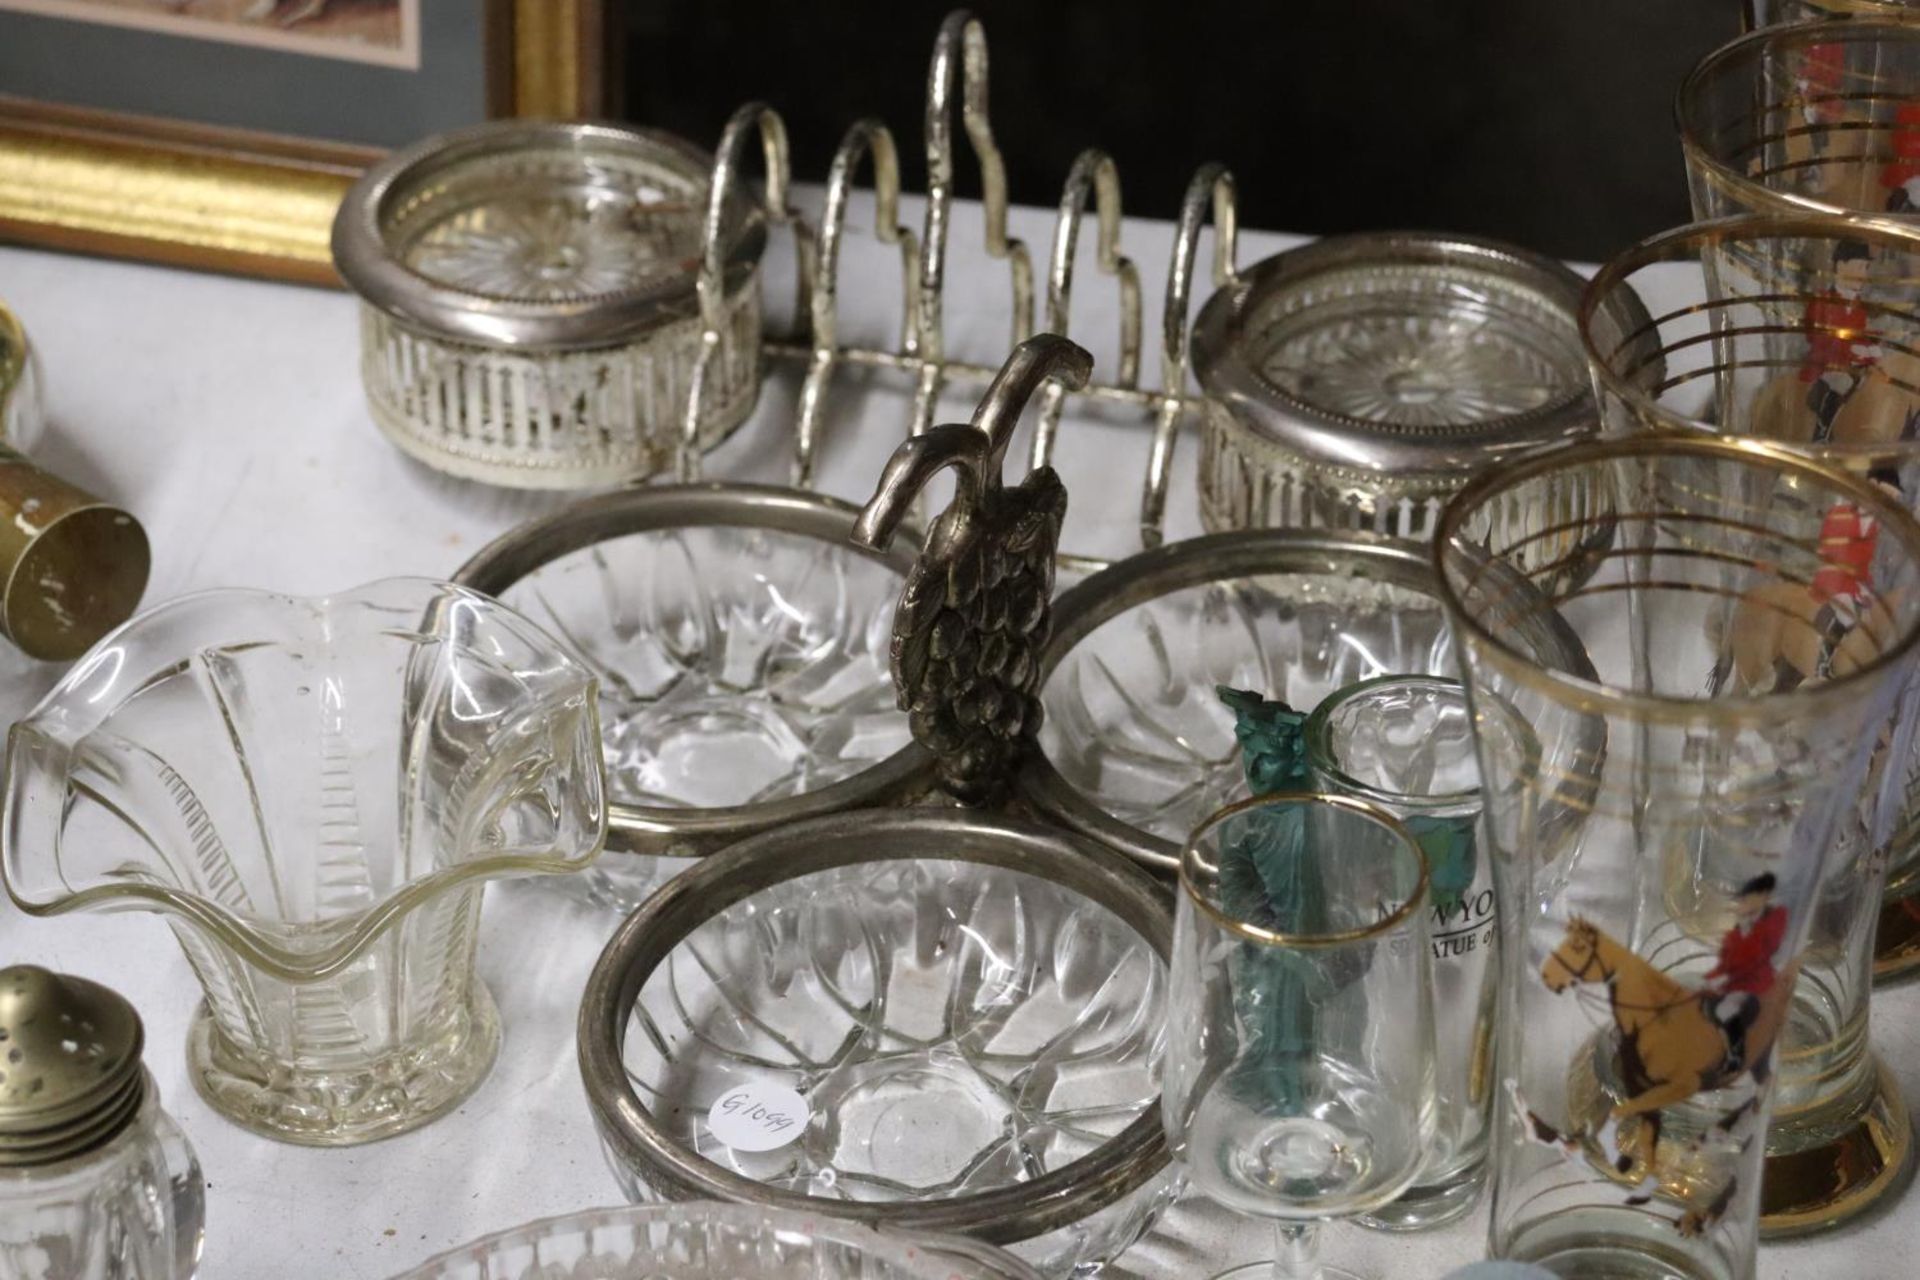 A MIXED LOT OF GLASSWARE TO INCLUDE HUNTING GLASSES, MINIATURE GLASS TANKERS, GLASS ICE CUBES ETC - Image 7 of 7